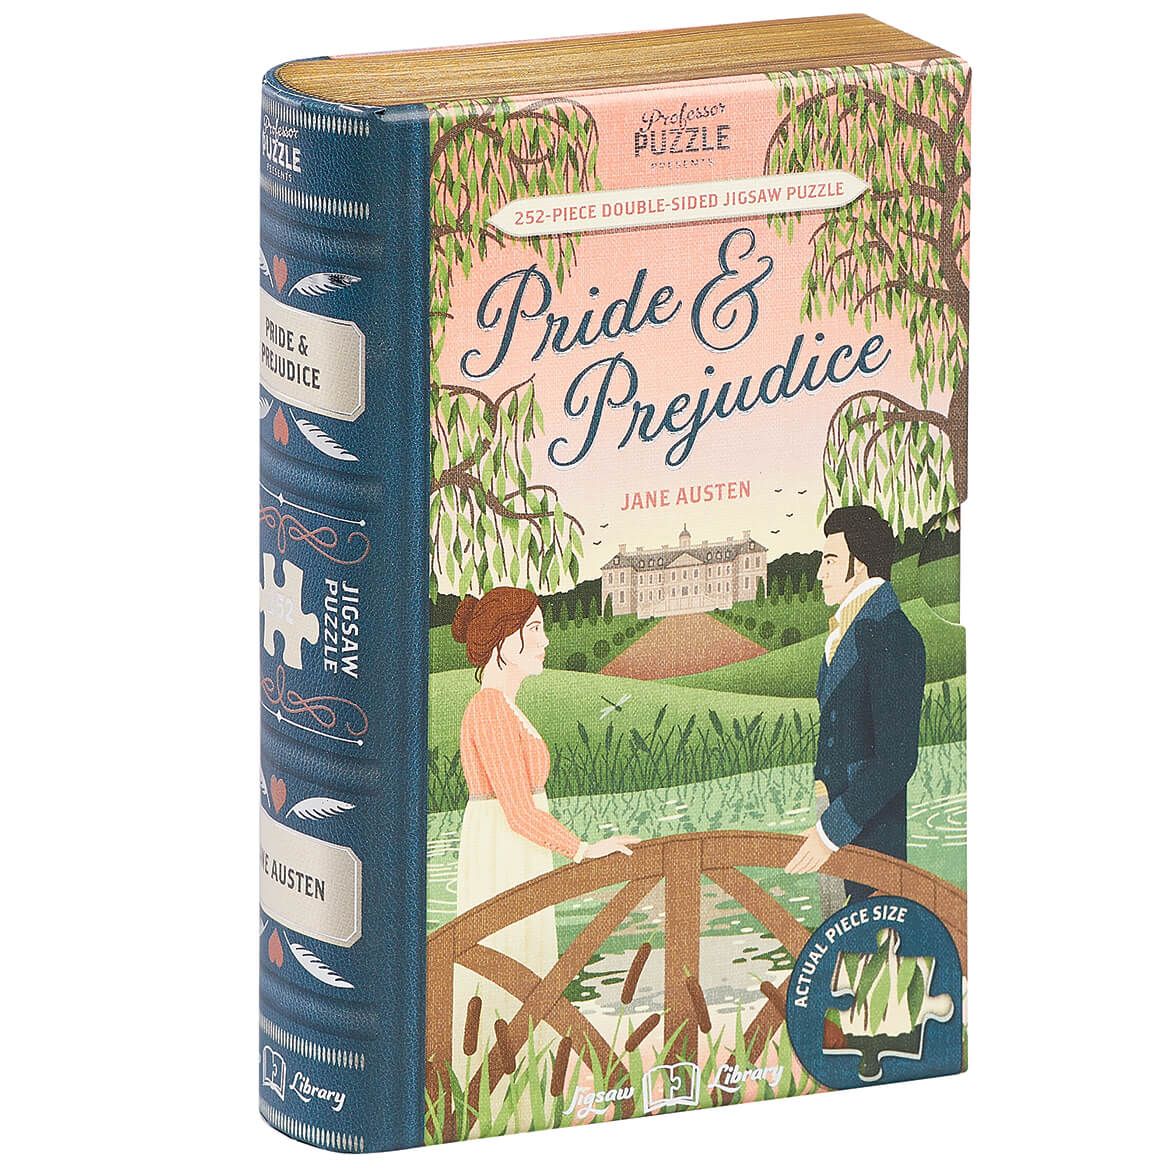 Jigsaw Library "Pride & Prejudice" 2-Sided Puzzle + '-' + 372660